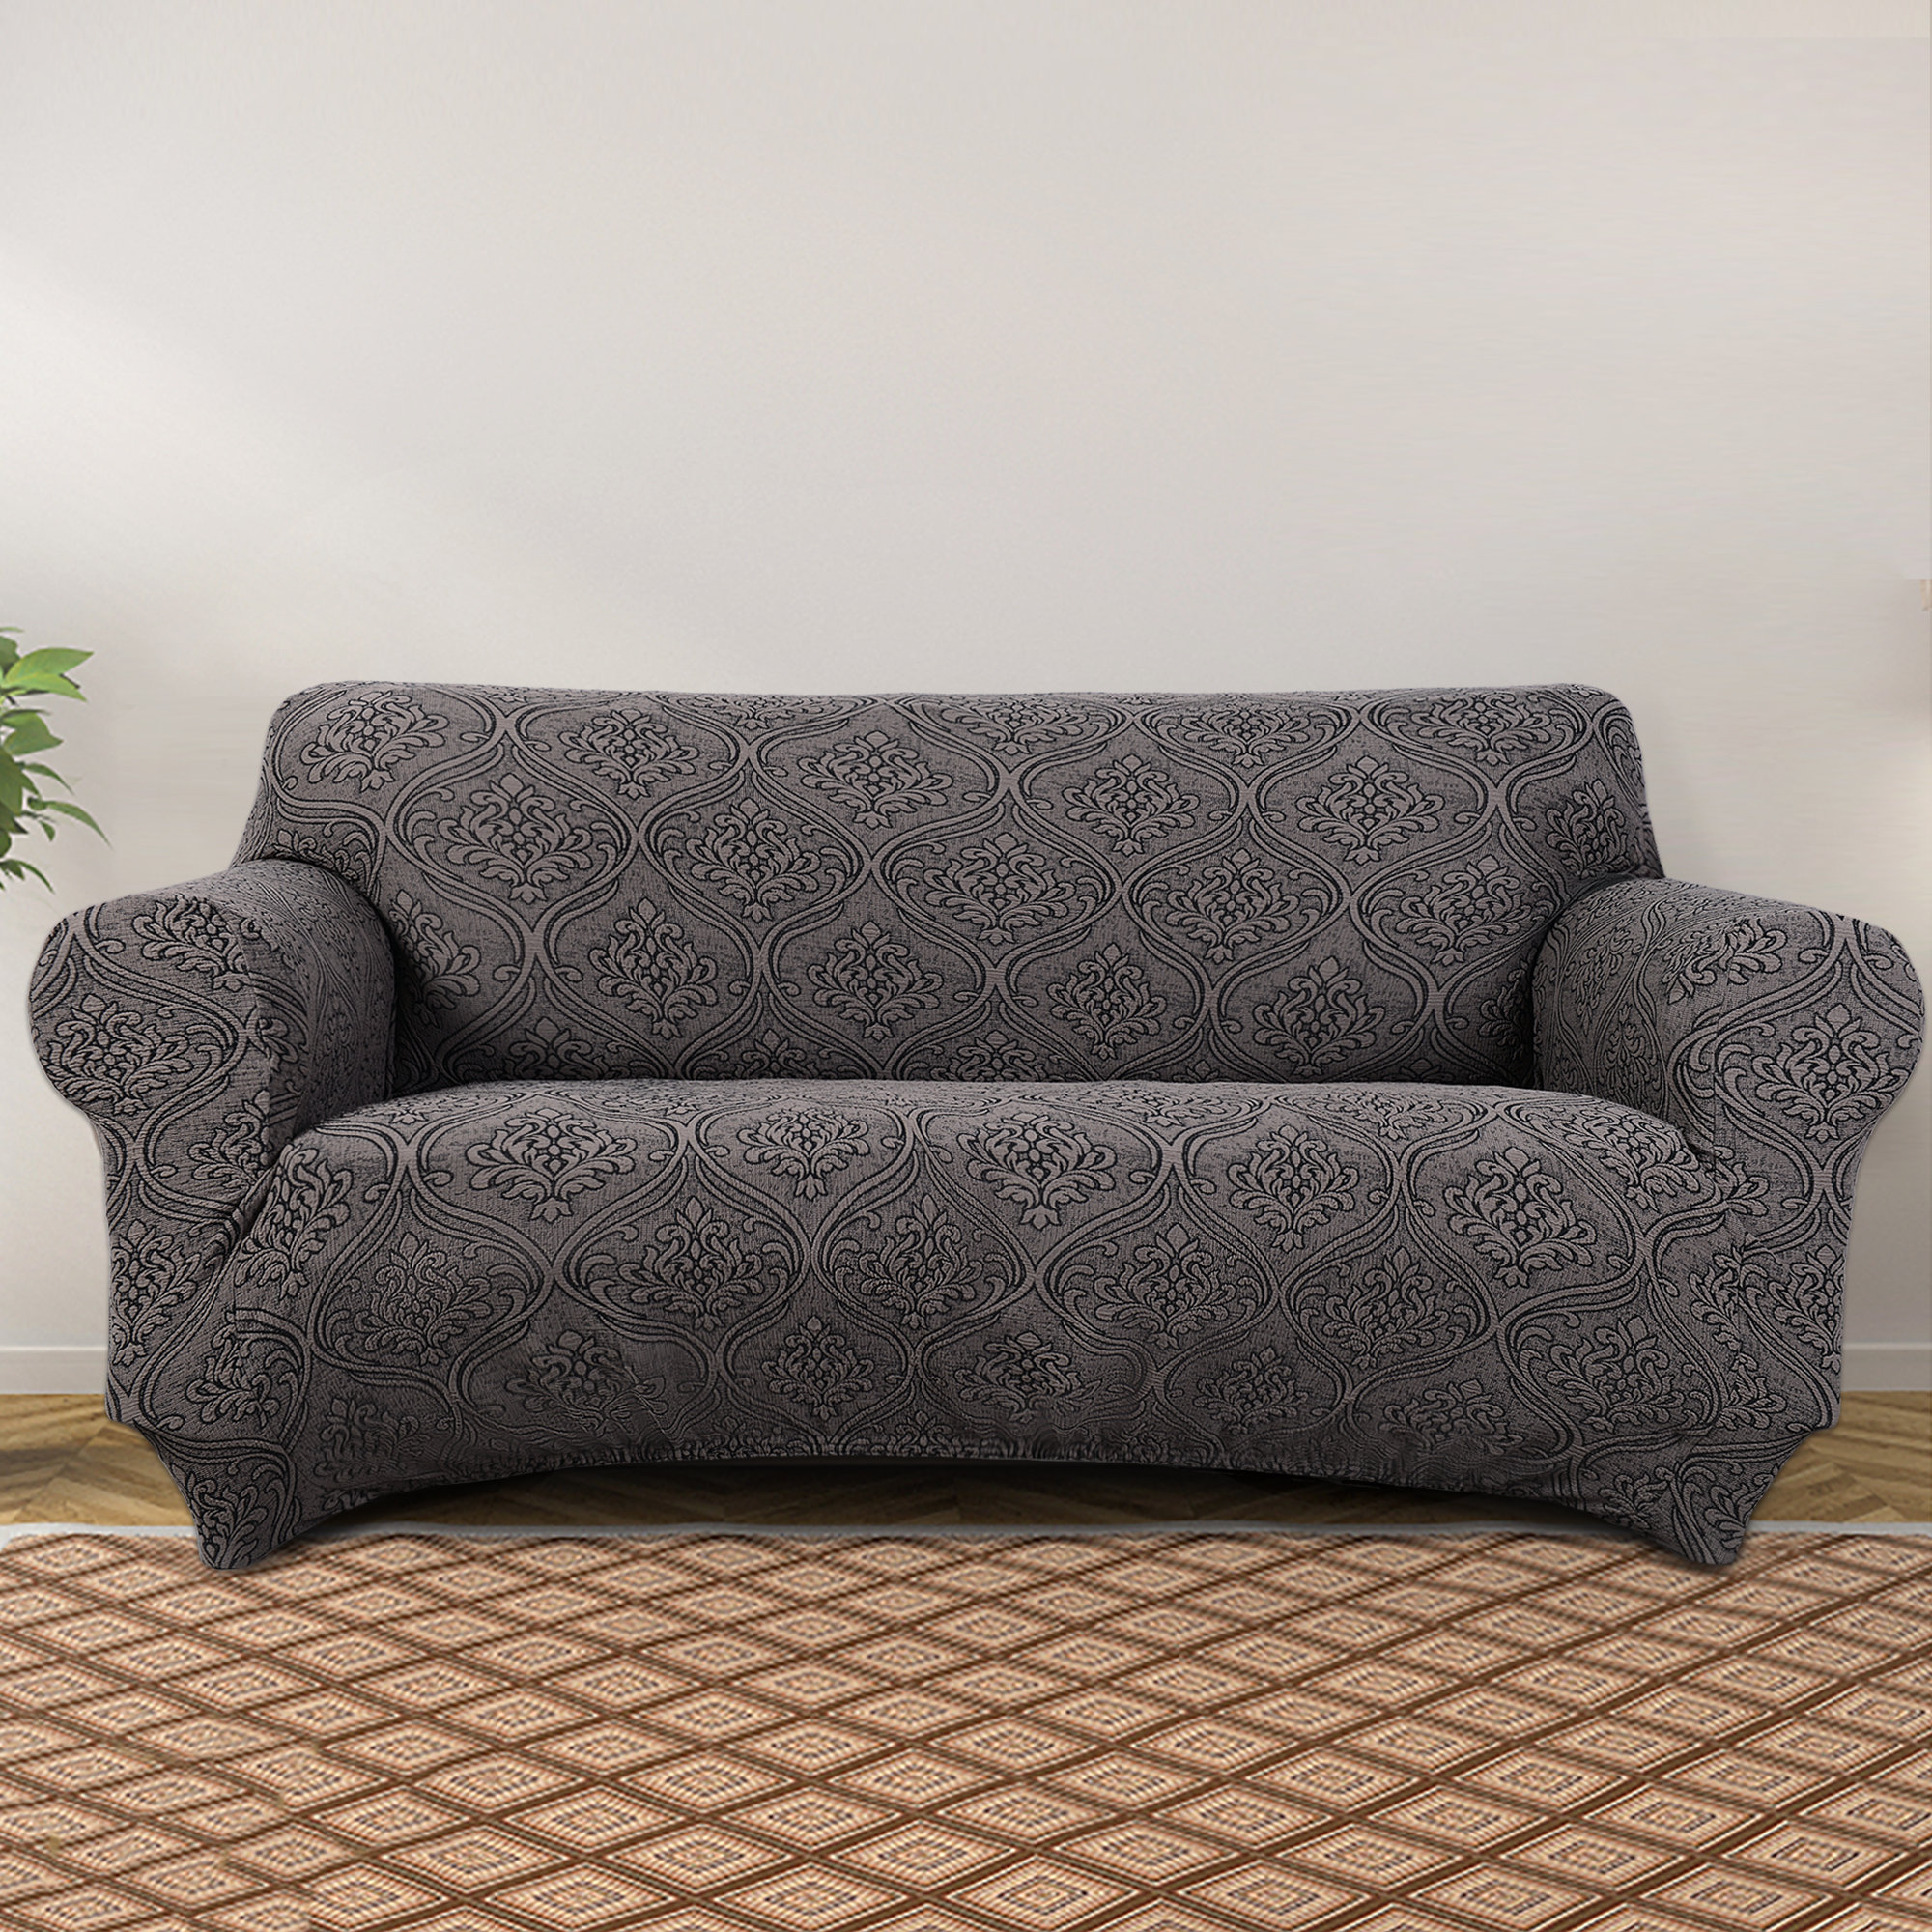 Loveseat / Fits Sofa large set of 2 inserts Tuck Once Slipcover Grips, 